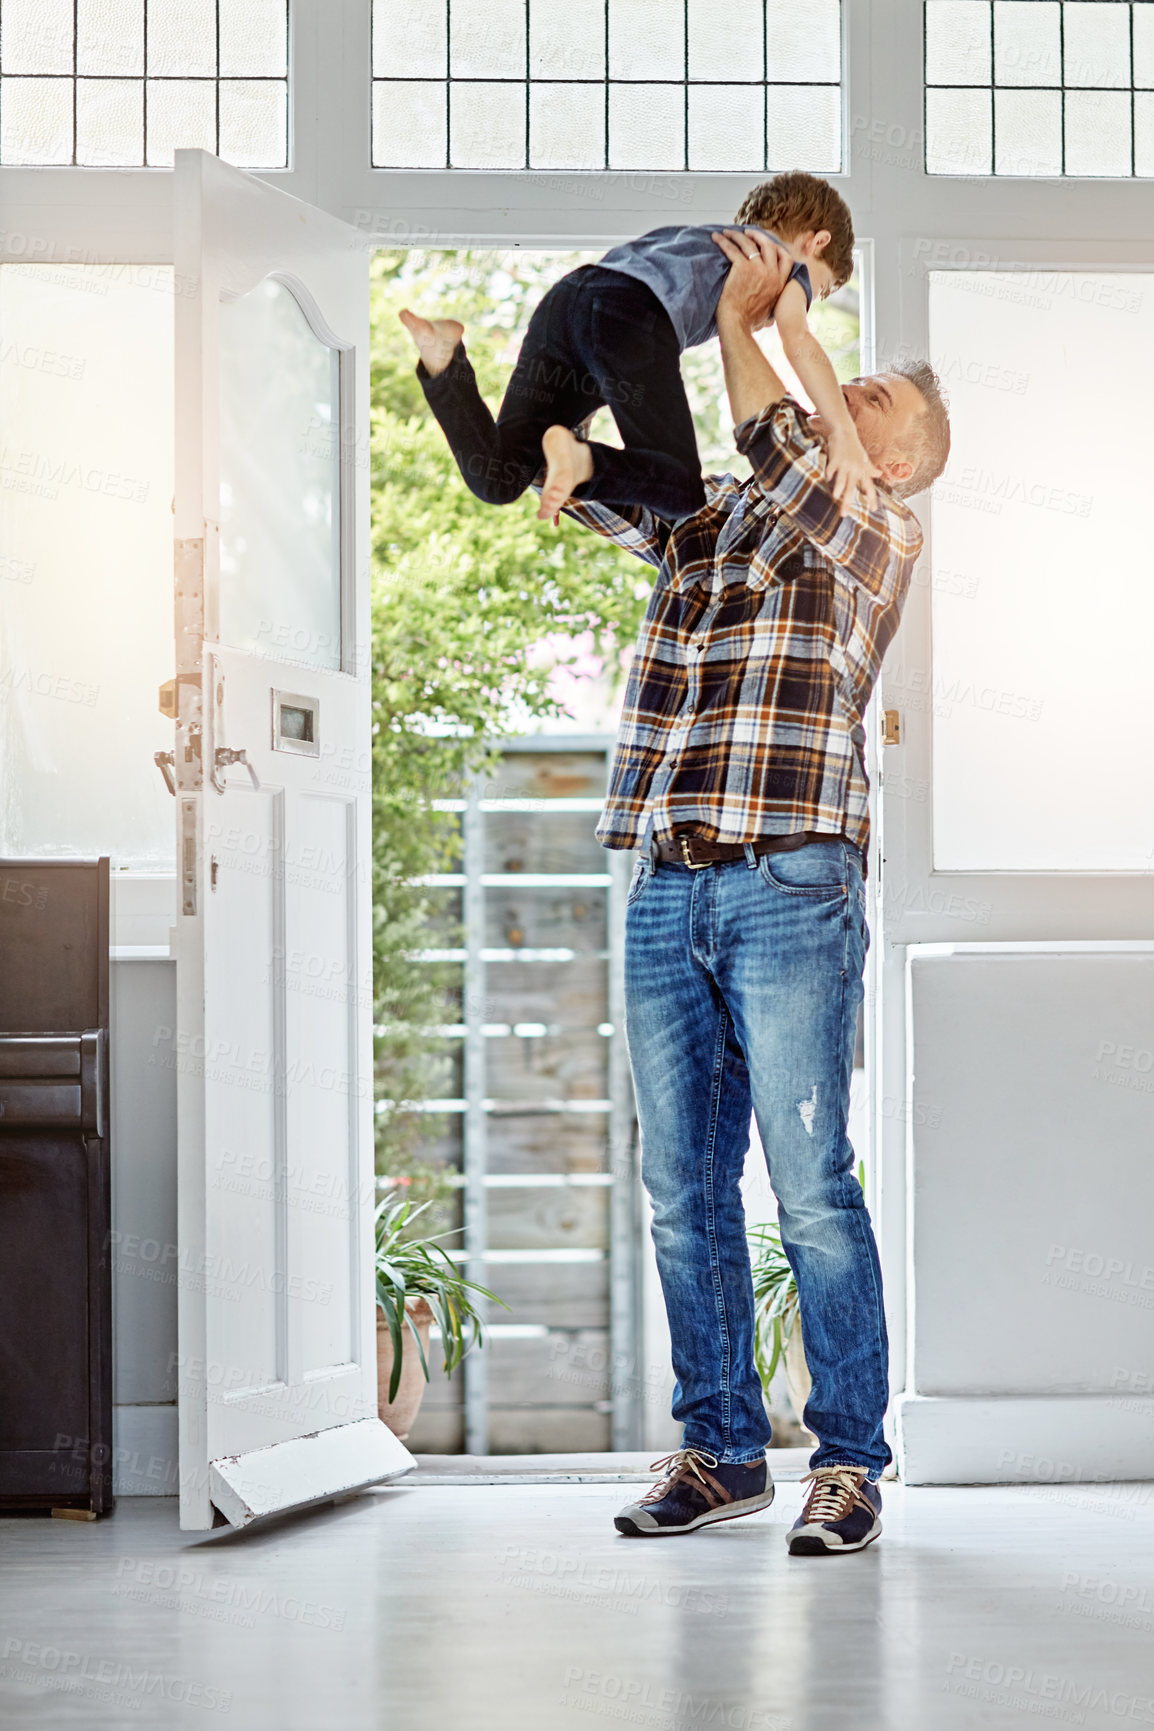 Buy stock photo Family, lifting and father with son at front door for coming home, airplane and game, happy and smile. Man, boy and excited parent return after work, greeting and hug, playing and parenthood moment